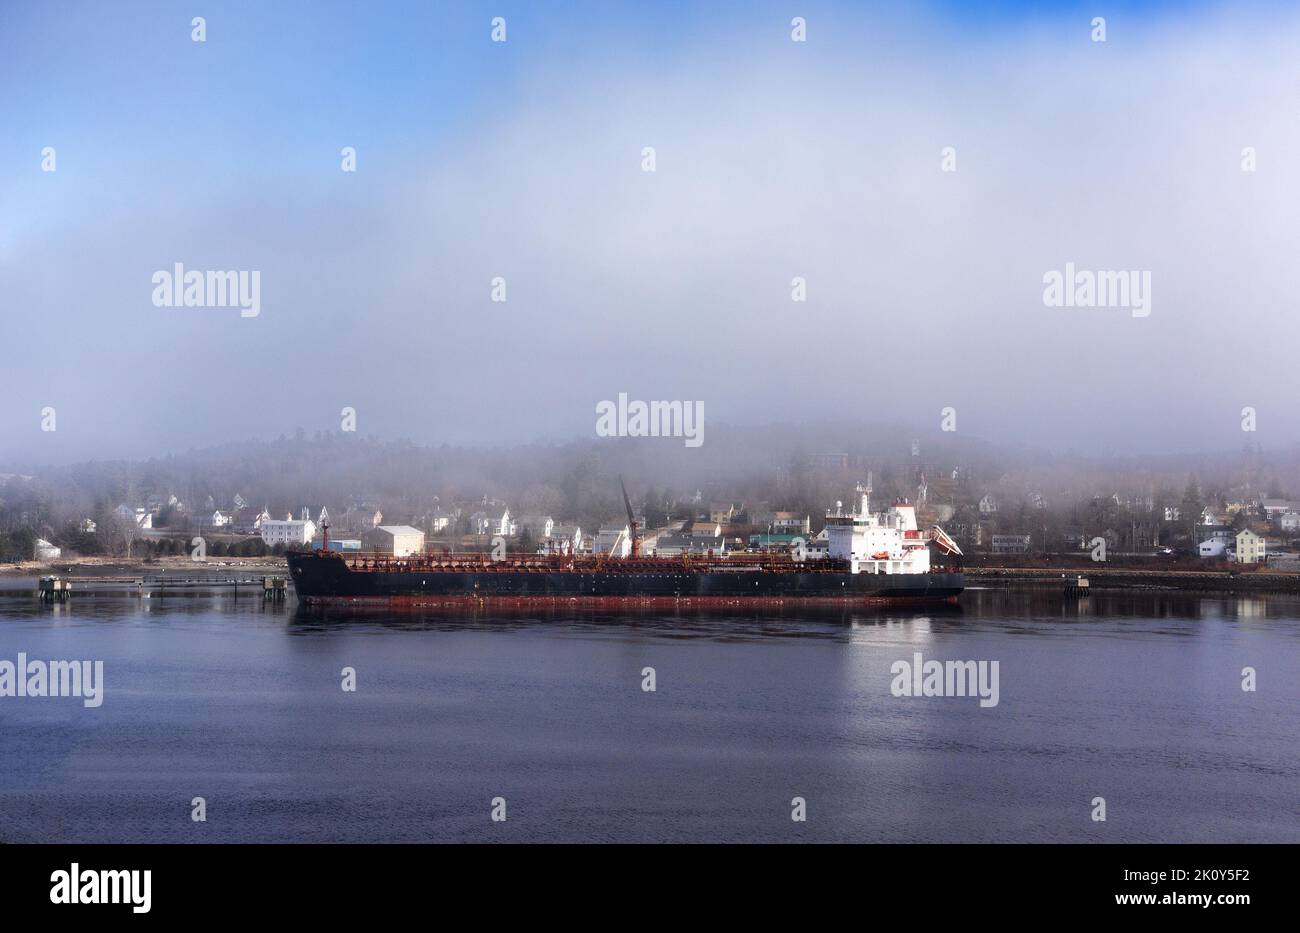 Wide view of a large oil tanker at a commercial pier in Maine on a foggy day. Stock Photo